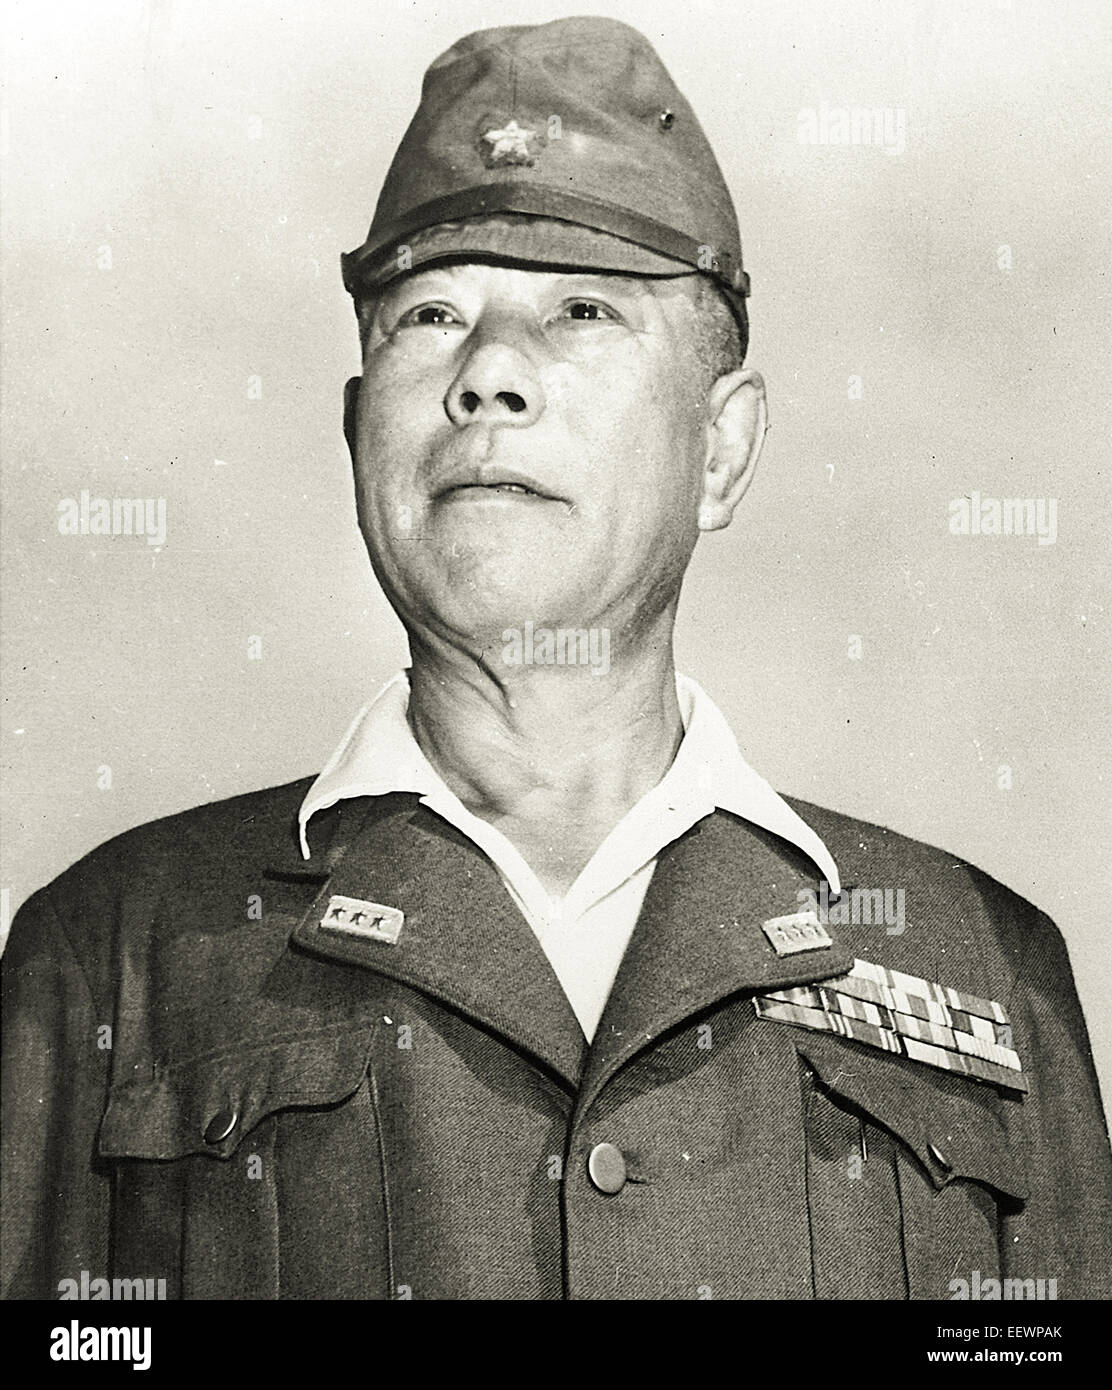 Tomoyuki Yamashita (1885-1946), Imperial Japanese Army general during World War II who invaded the British possessions of Malaya and Singapore. From 29 October to 7 December 1945, an American military tribunal in Manila tried General Yamashita for war crimes relating to the Manila massacre and many atrocities in the Philippines and Singapore. The court found Yamashita guilty as charged and sentenced him to death. Photograph taken 29 October 1945 at start of his trial. Stock Photo